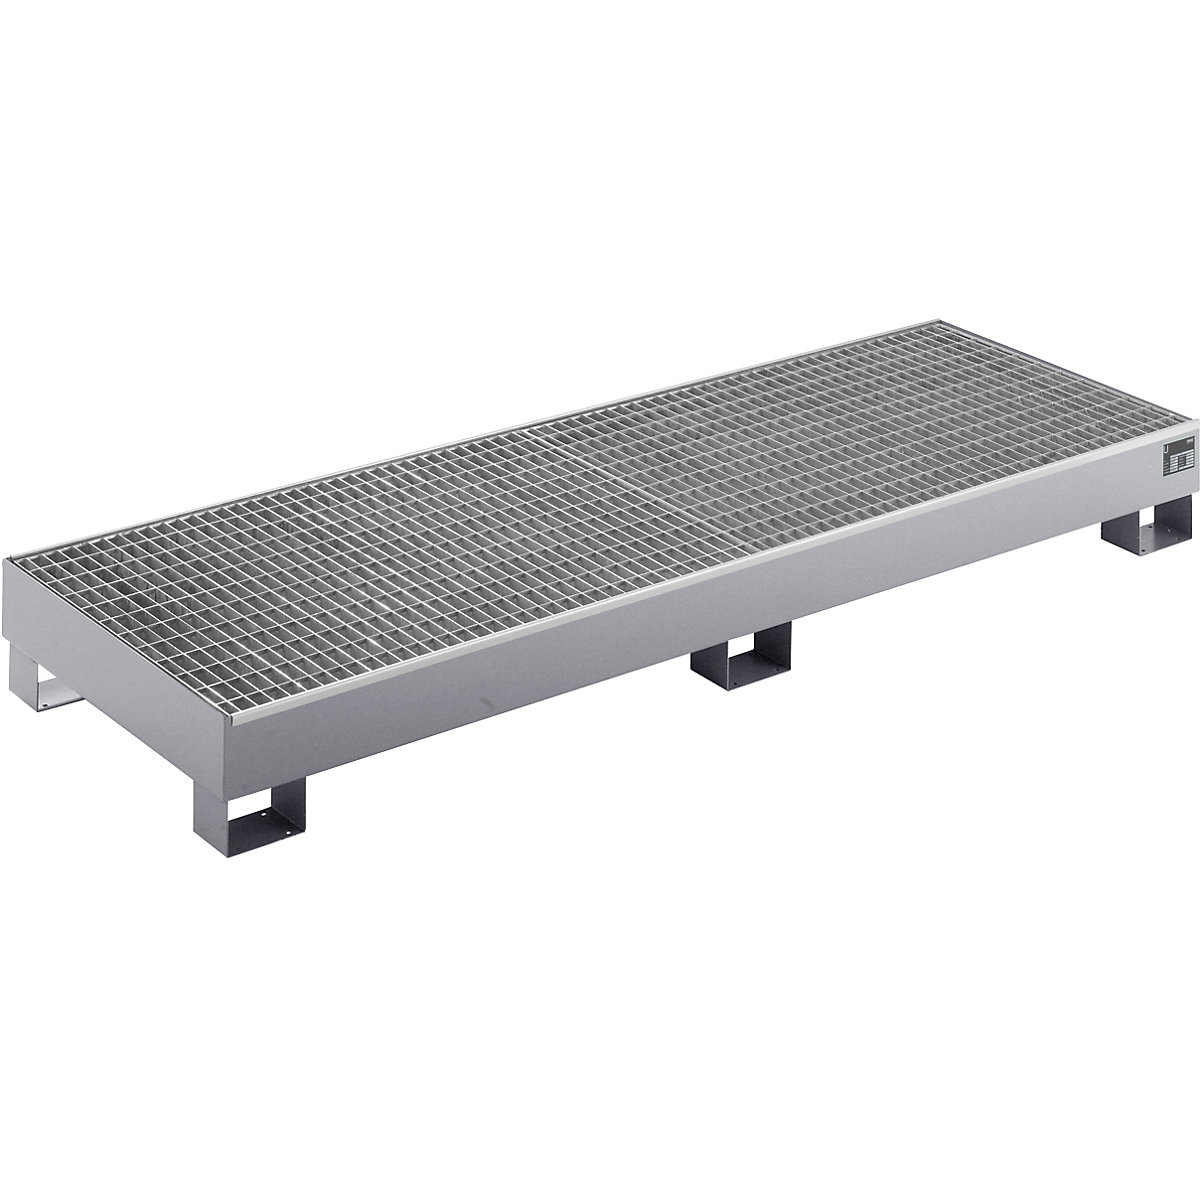 EUROKRAFTbasic – Sump tray made from sheet steel, LxWxH 2400 x 800 x 250 mm, hot dip galvanised, with grate